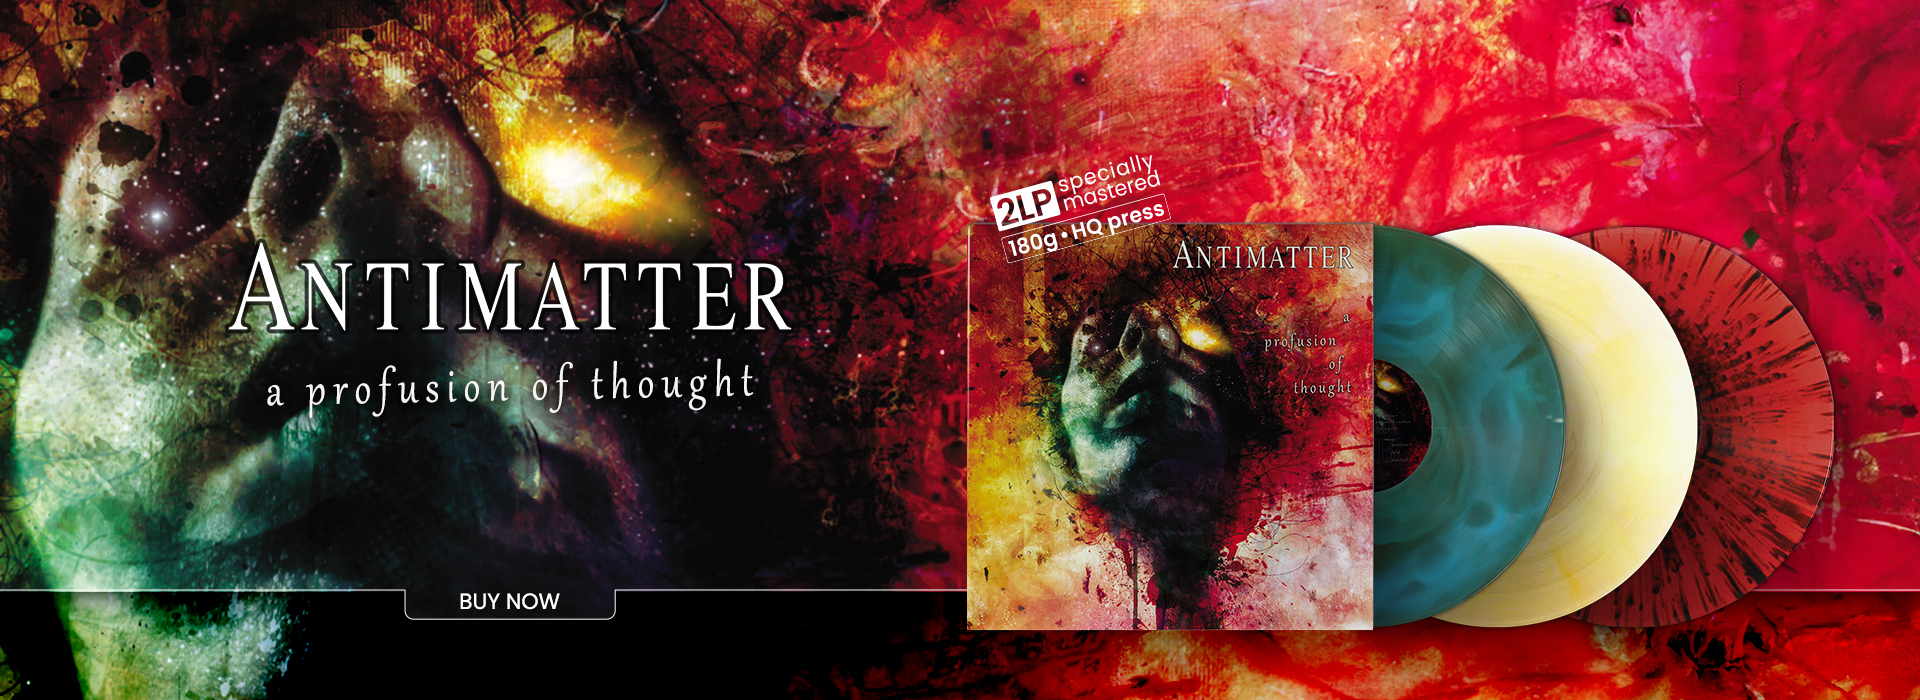 Antimatter-a-profusion-of-thought